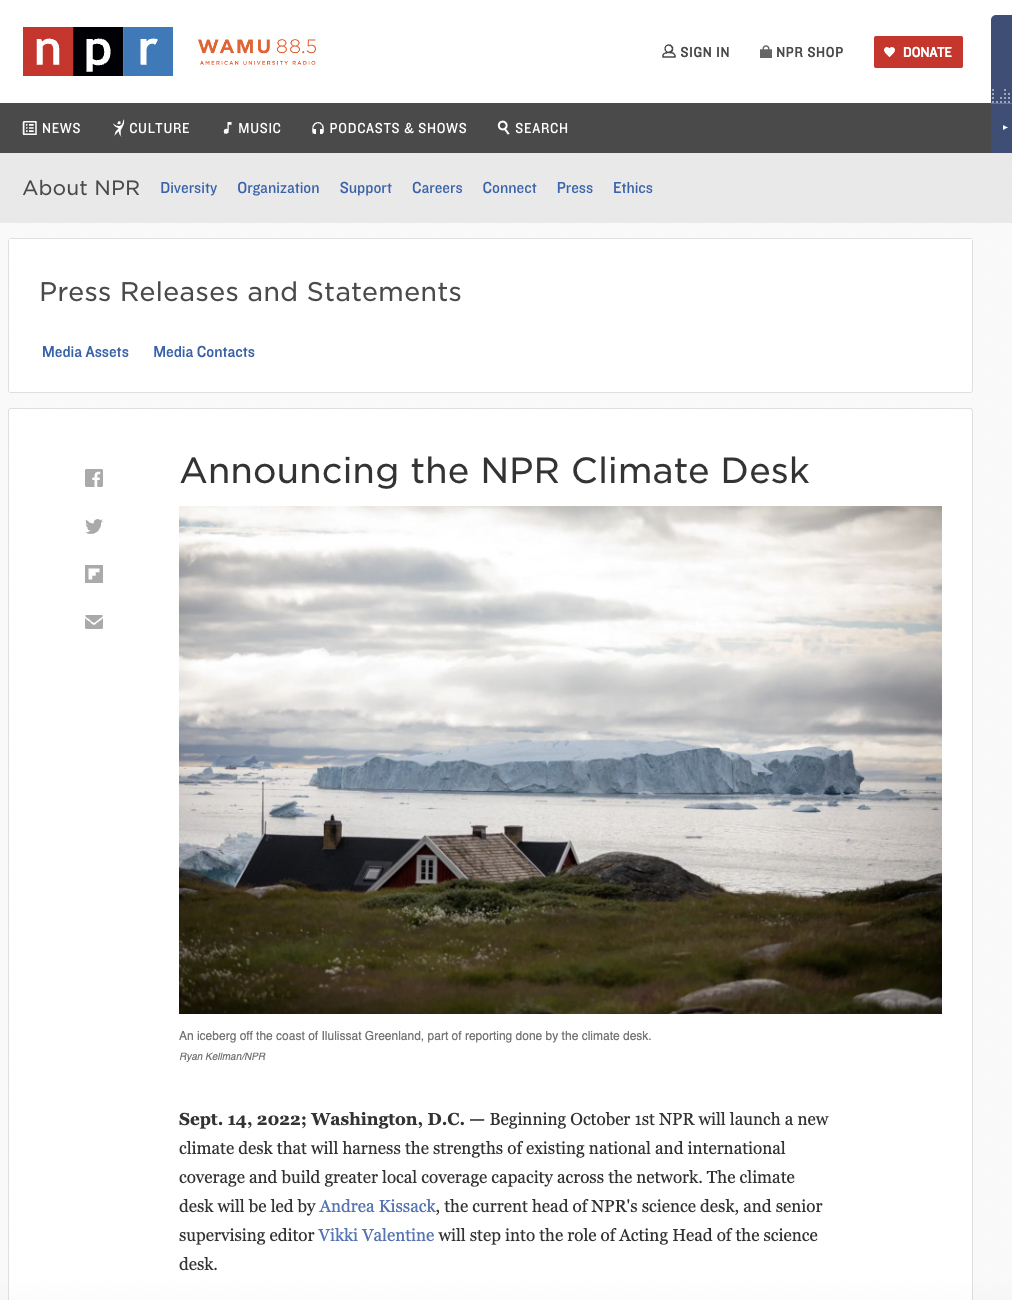 Checkbook Journalism: Bought & Paid for Climate ‘News’: NPR Announces Facebook’s Zuckerberg & Rockefeller Foundation Will Be funding NPR’s ‘Climate Desk’